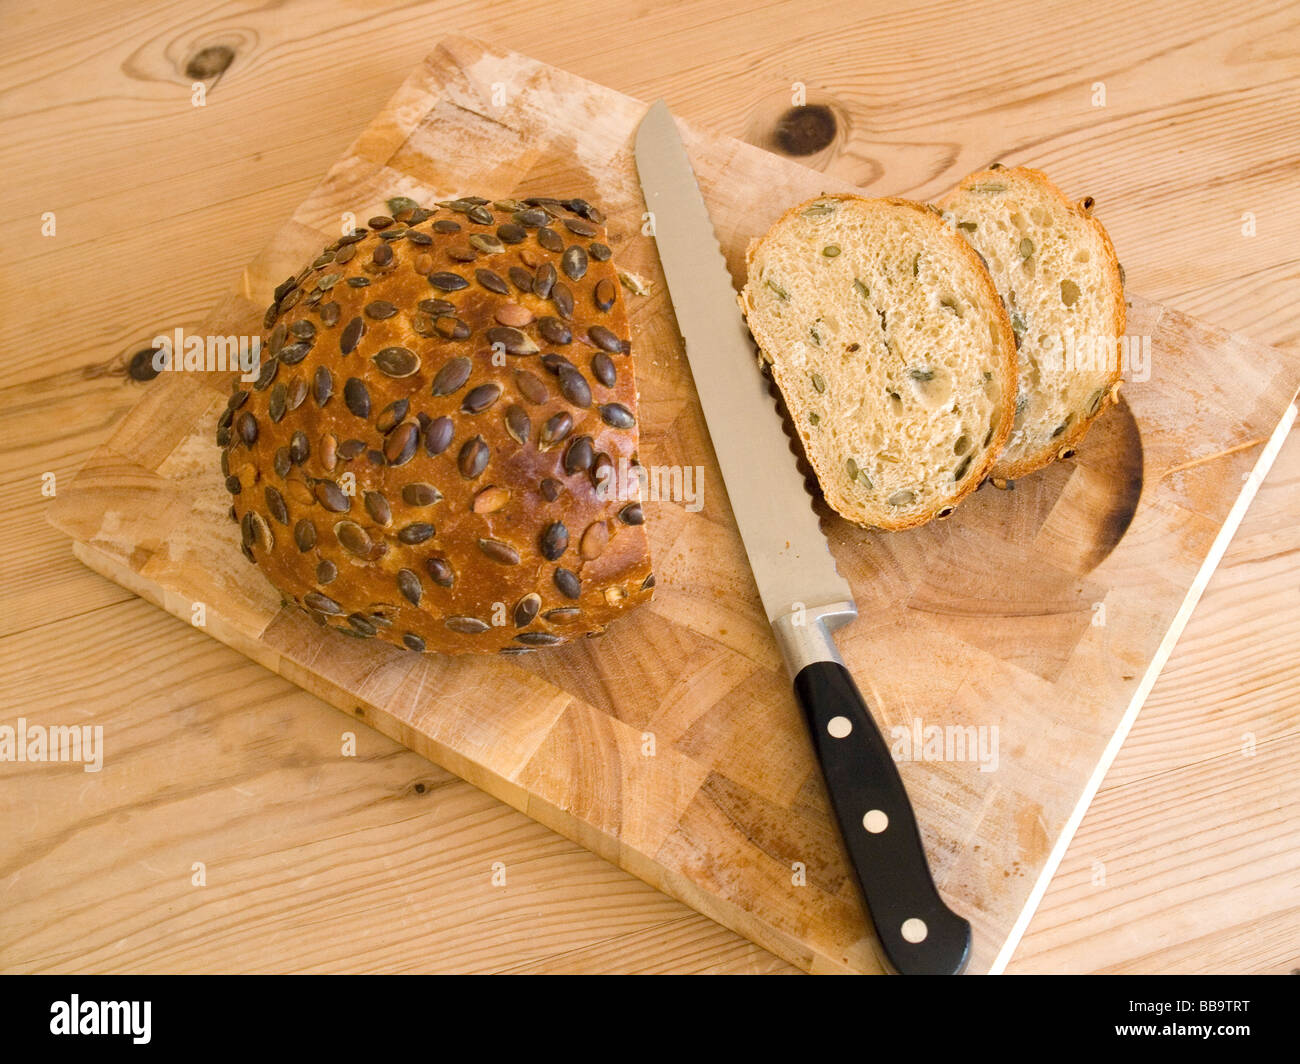 A newly sliced loaf of stone baked pumpkin seed loaf with a bread knife on a wooden board Stock Photo